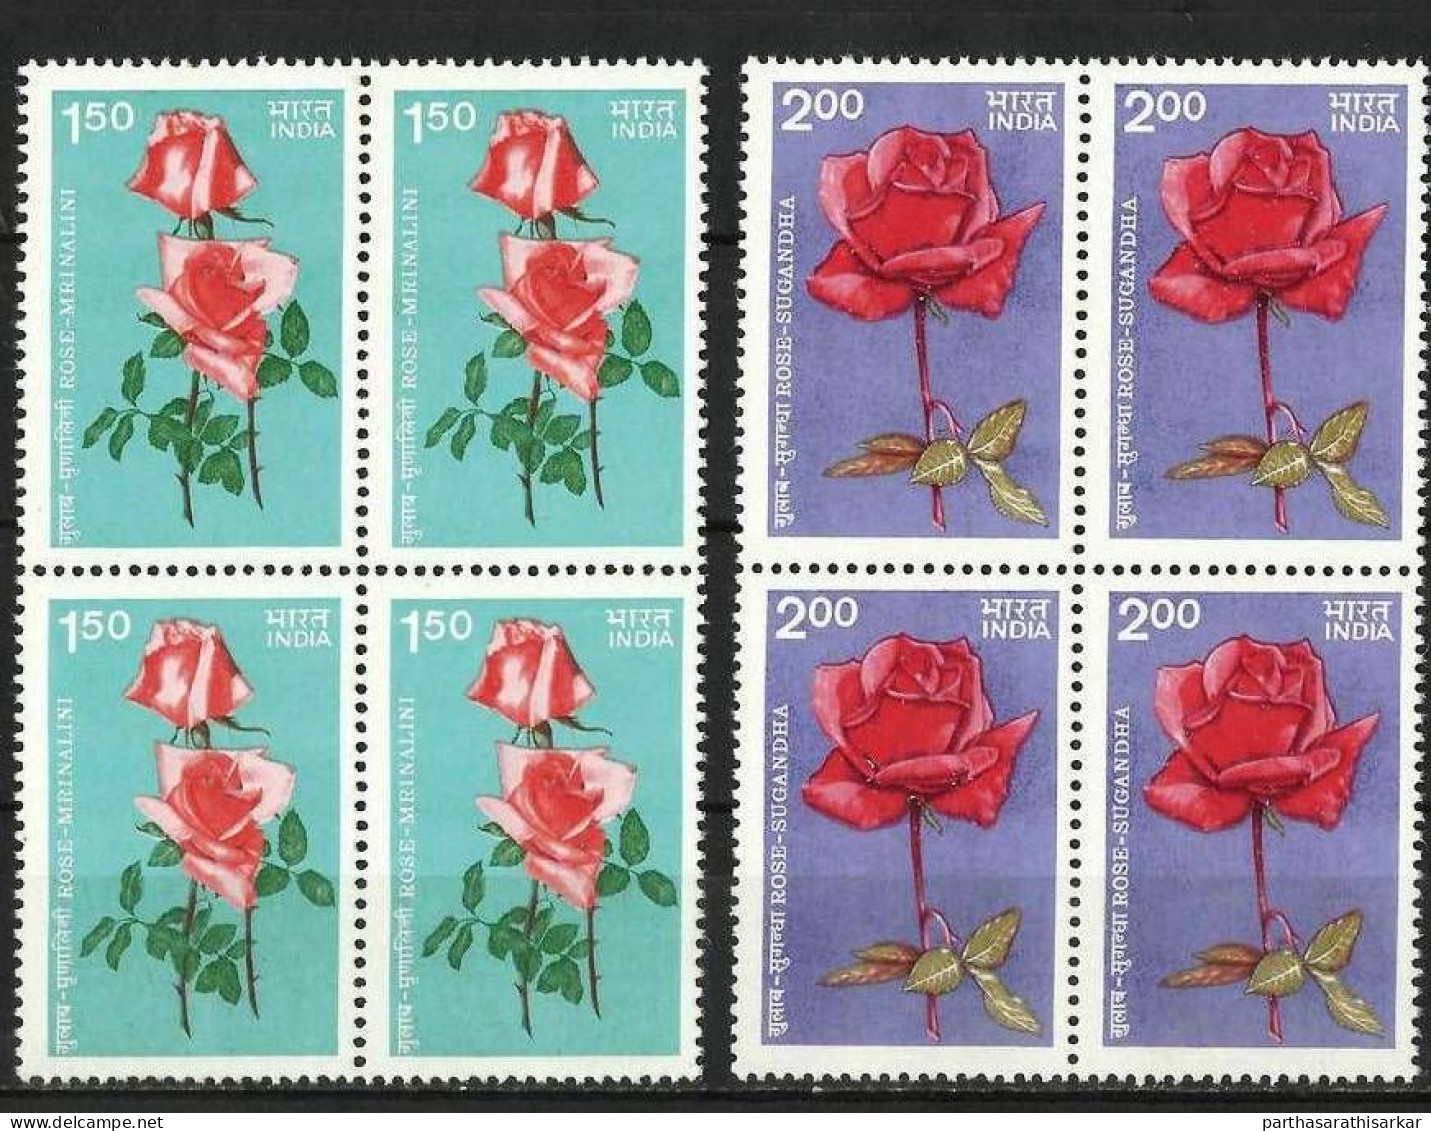 INDIA 1984 ROSES COMPLETE SET BLOCK OF 4 MNH - Neufs